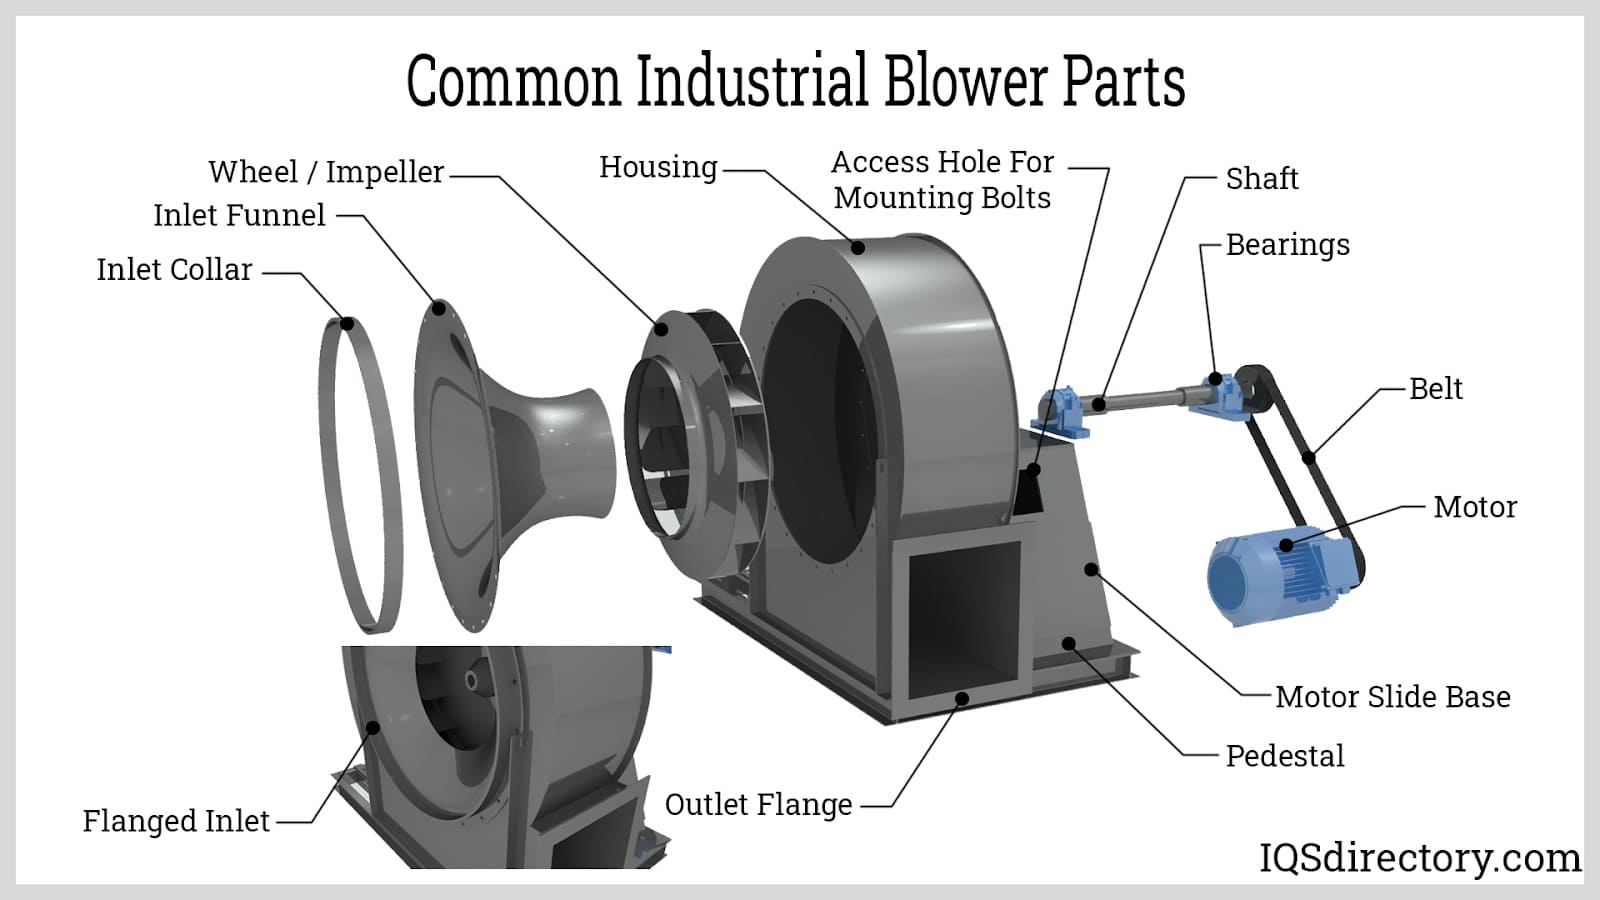 Common Industrial Blower Parts